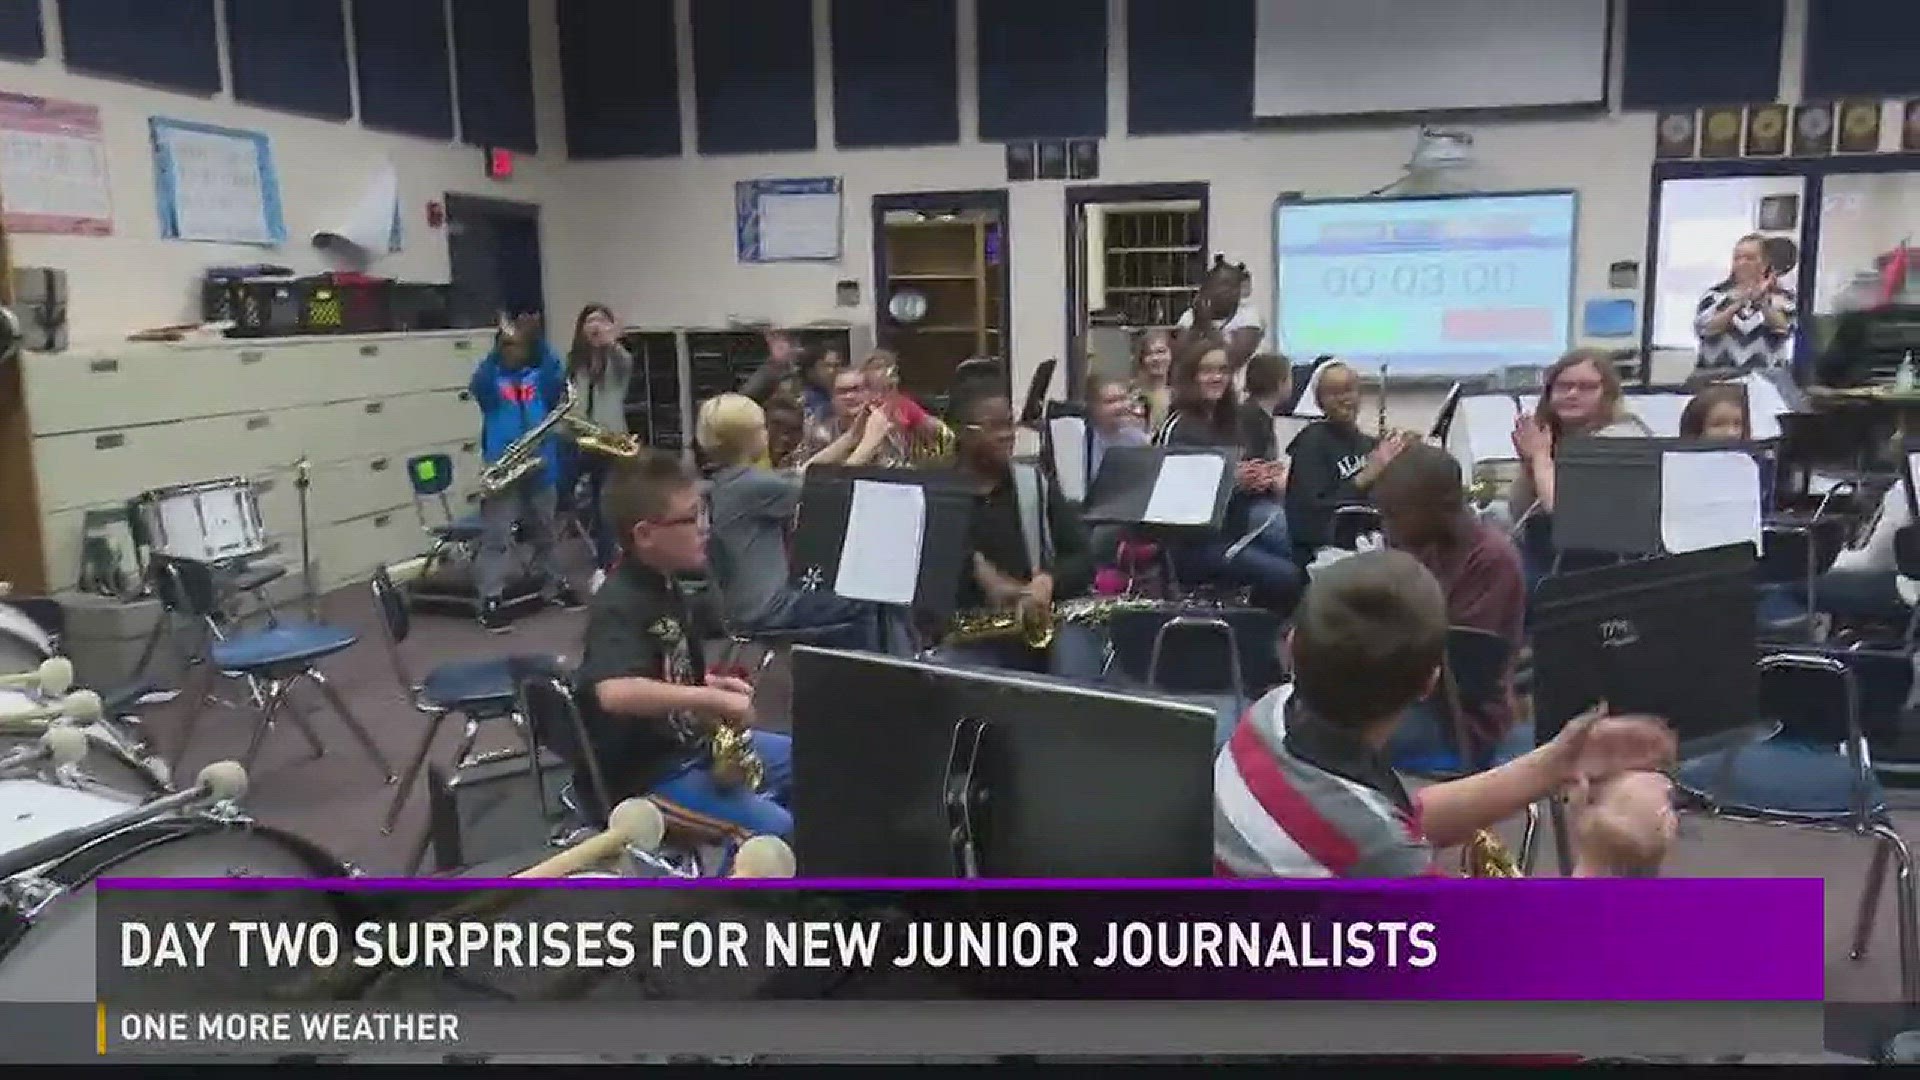 Day Two surprises for new Junior Journalists